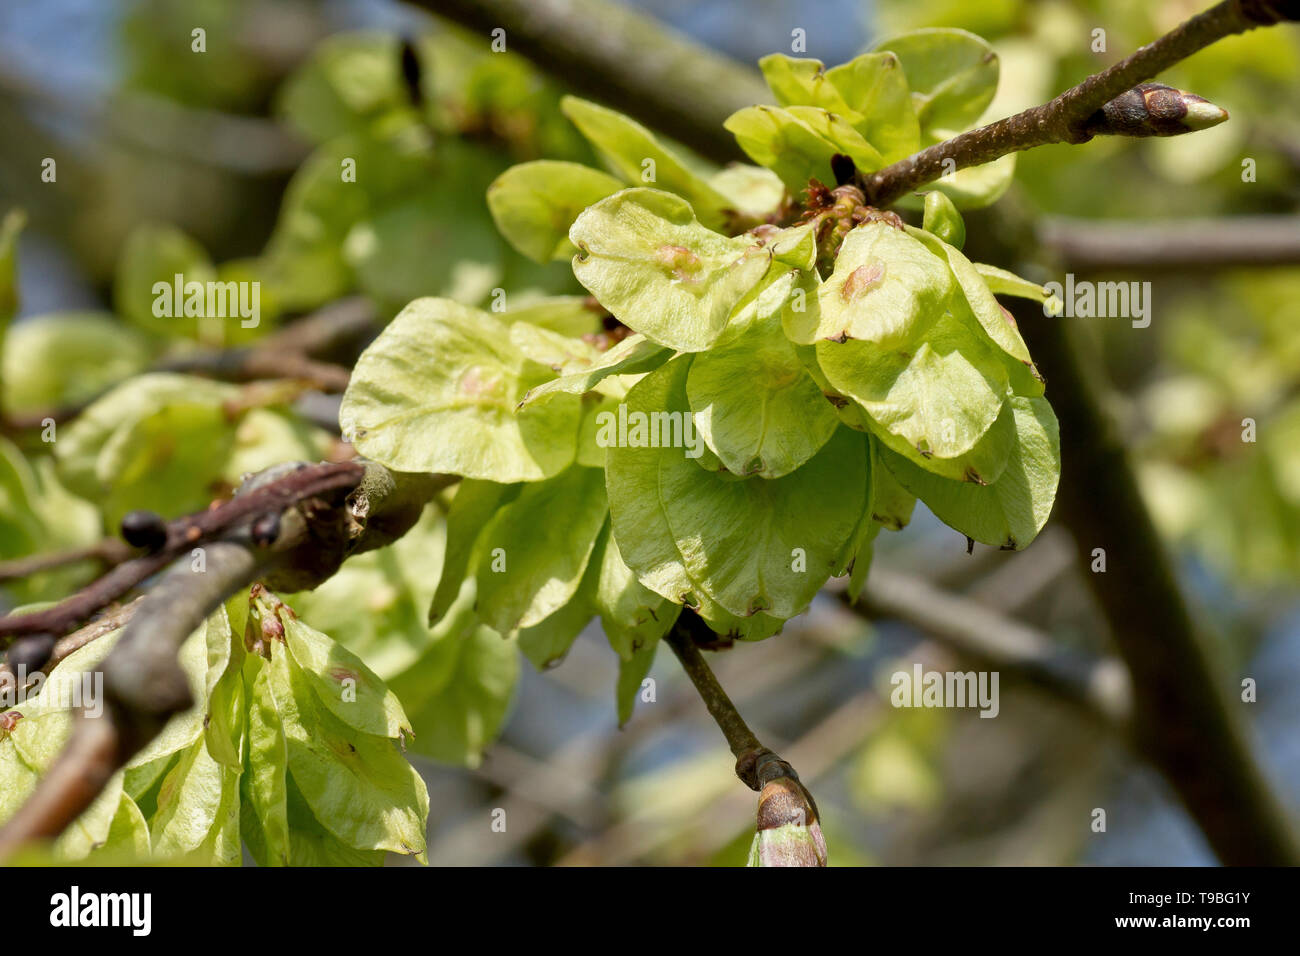 Wych Elm (ulmus glabra), close up of the fruit or seed pods of the tree. Stock Photo